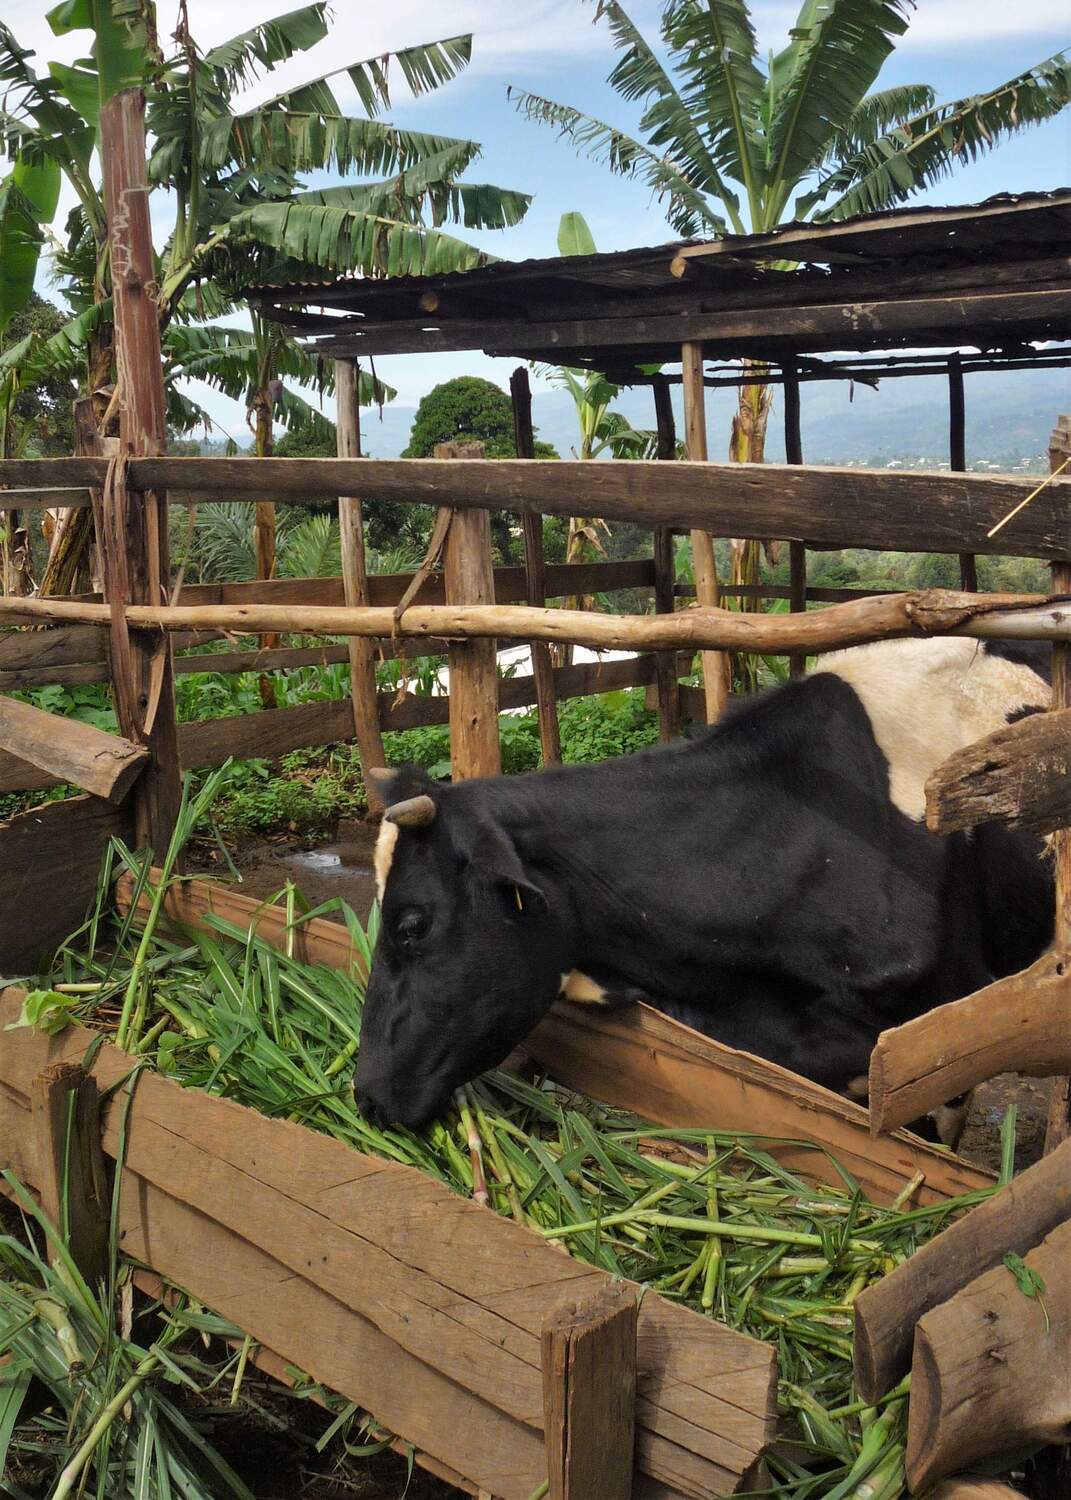 Holstein-Friesian cow on a peri-urban farm. The city of Bamenda can be seen in the background.